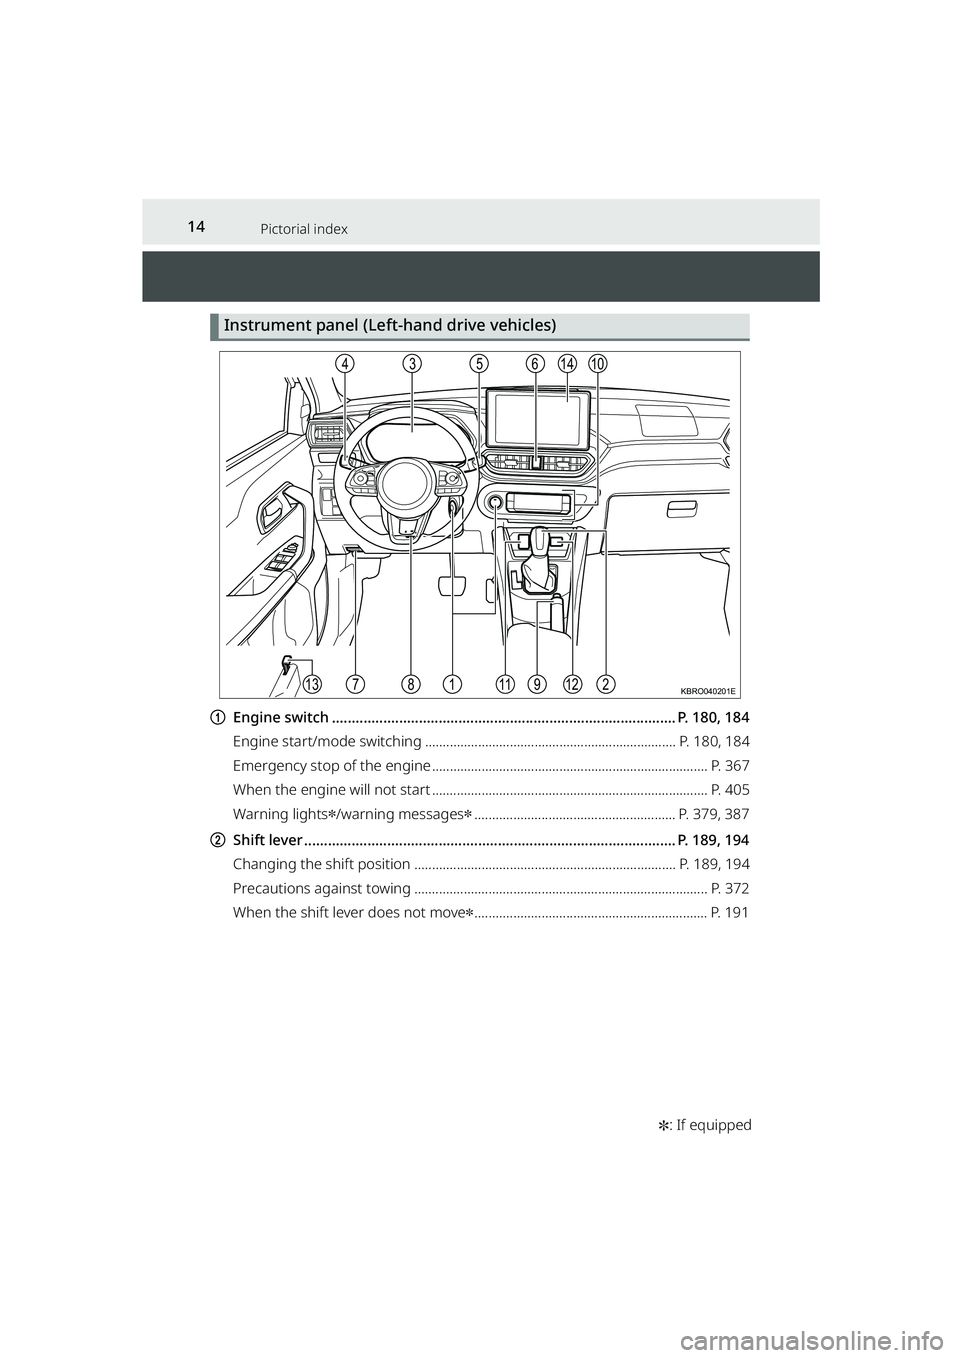 TOYOTA RAIZE 2023  Owners Manual 14Pictorial index
RAIZE_OM_General_BZ358E✽
: If equipped
Instrument panel (Left- hand drive vehicles)
aEngine switch .................................................................................